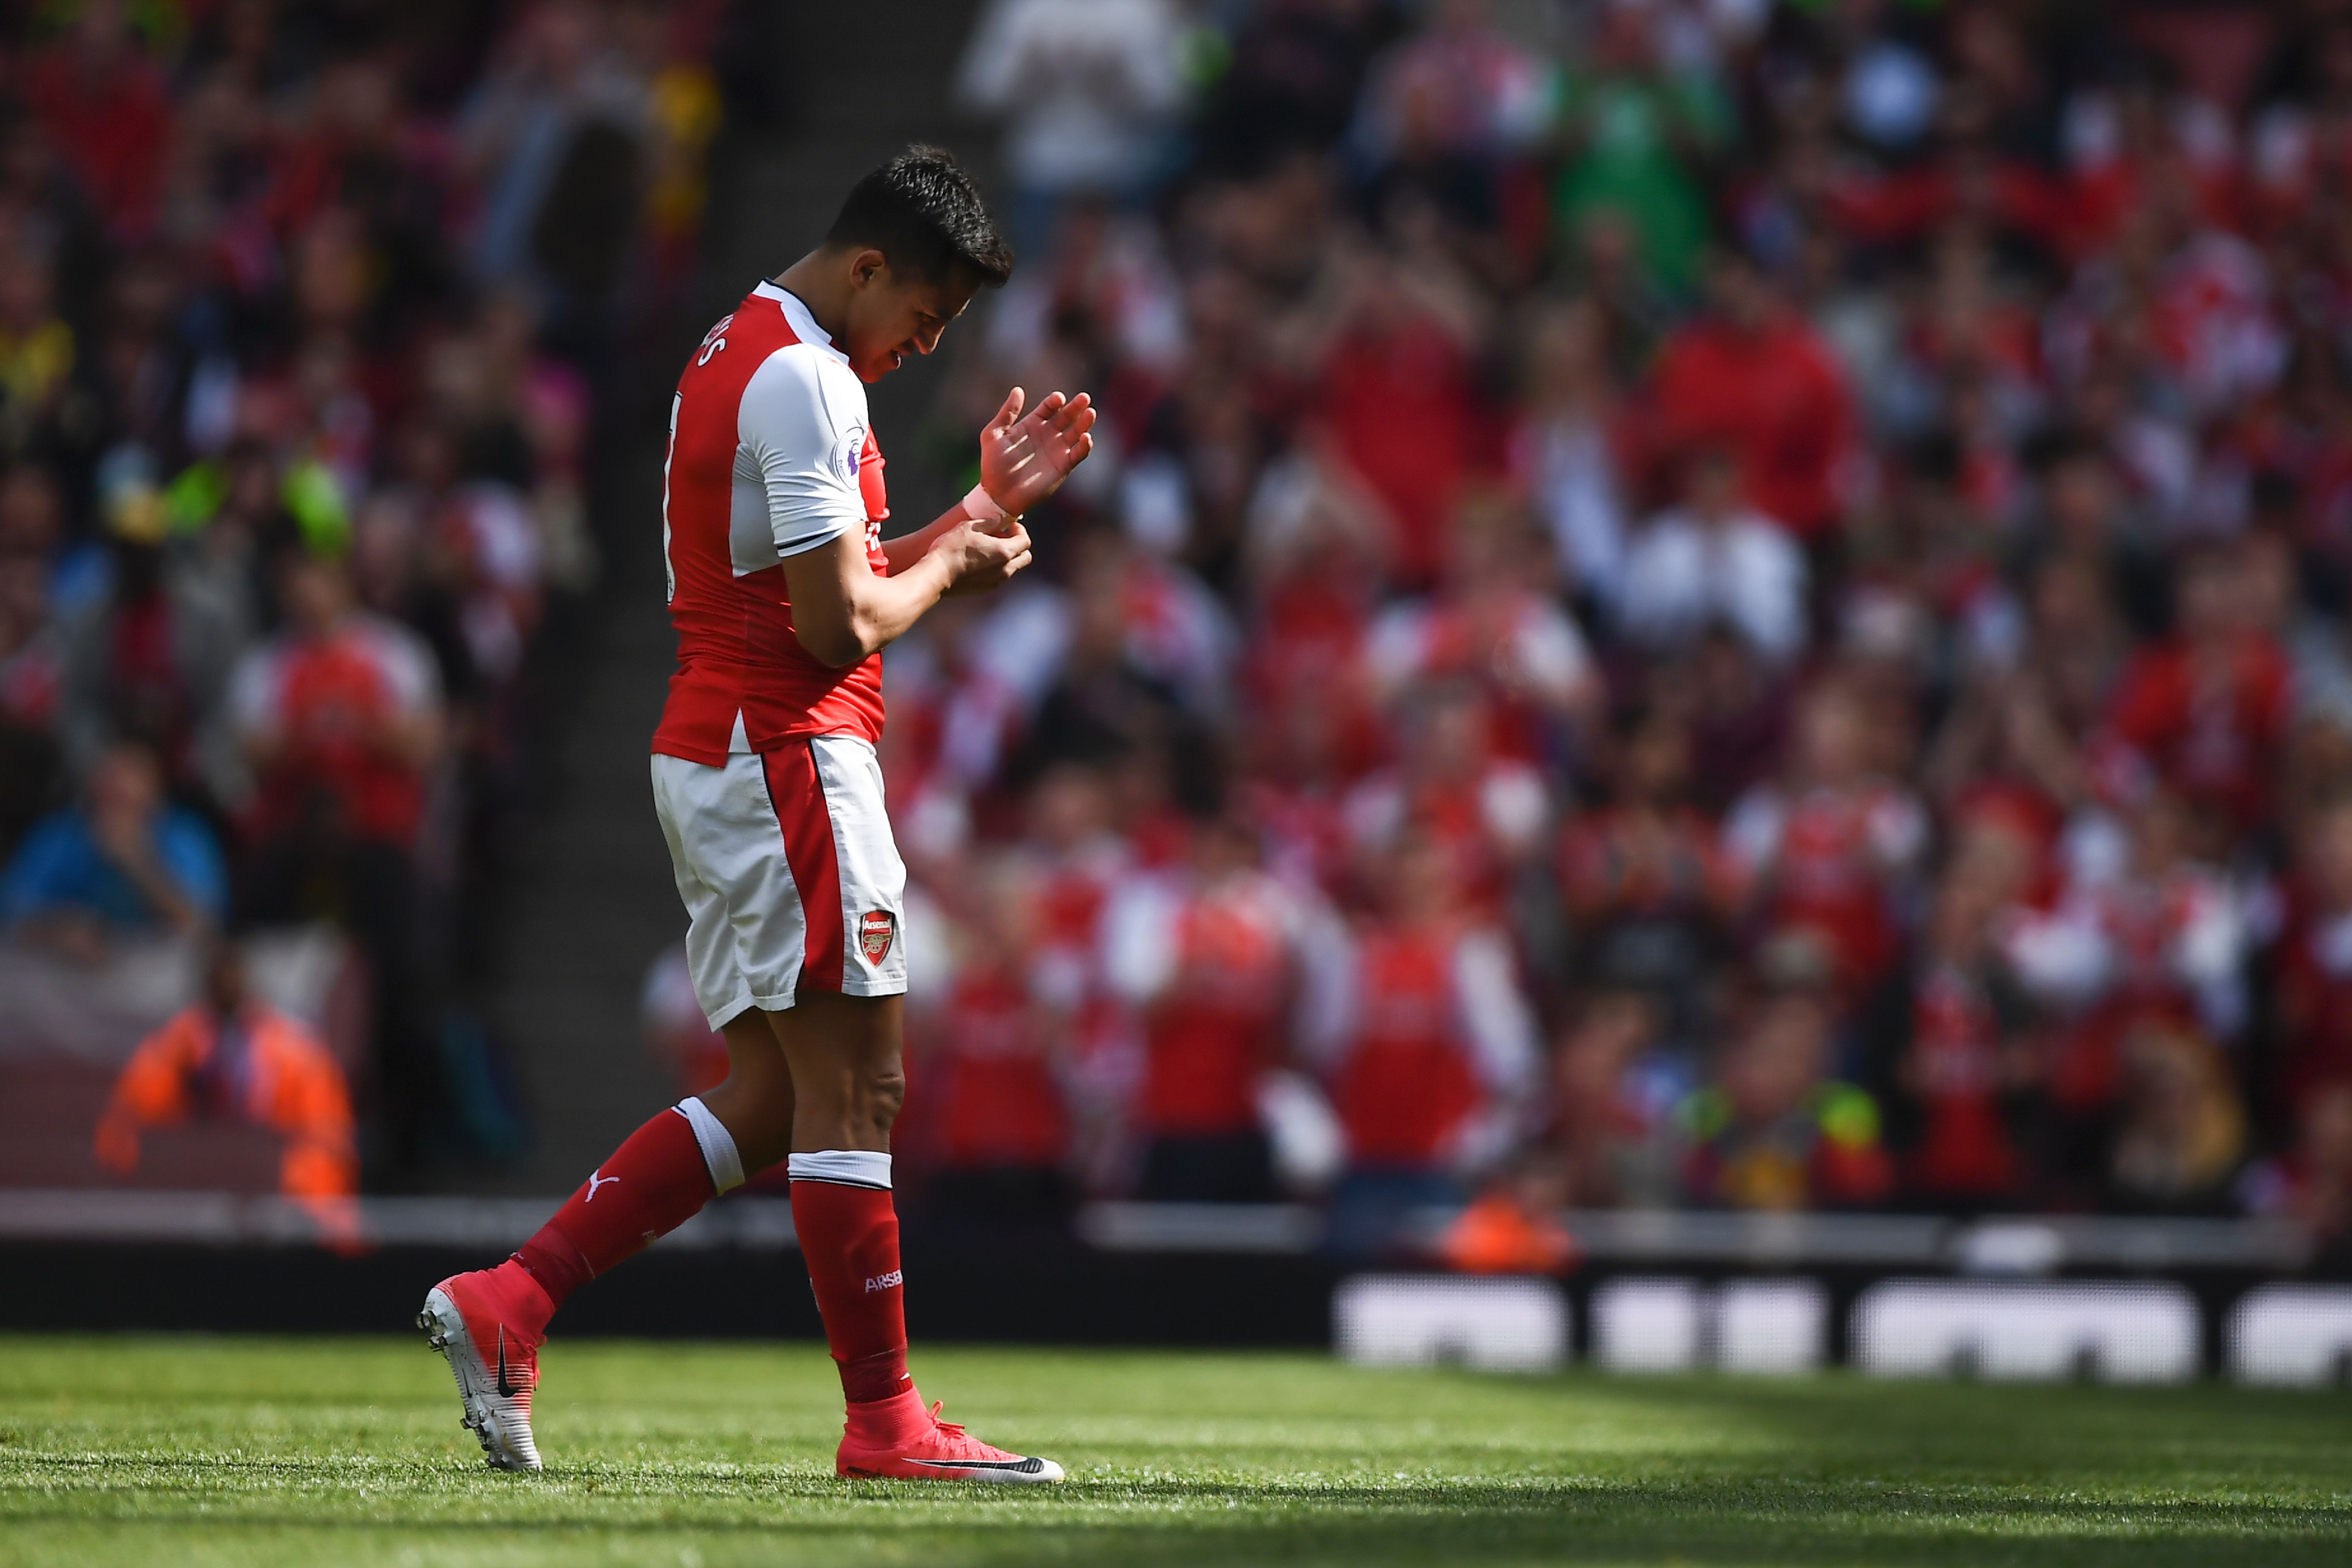 Arsenal's Chilean striker Alexis Sanchez leaves the pitch during the English Premier League football match between Arsenal and Everton at the Emirates Stadium in London on May 21, 2017.  / AFP PHOTO / Justin TALLIS / RESTRICTED TO EDITORIAL USE. No use with unauthorized audio, video, data, fixture lists, club/league logos or 'live' services. Online in-match use limited to 75 images, no video emulation. No use in betting, games or single club/league/player publications.  /         (Photo credit should read JUSTIN TALLIS/AFP/Getty Images)